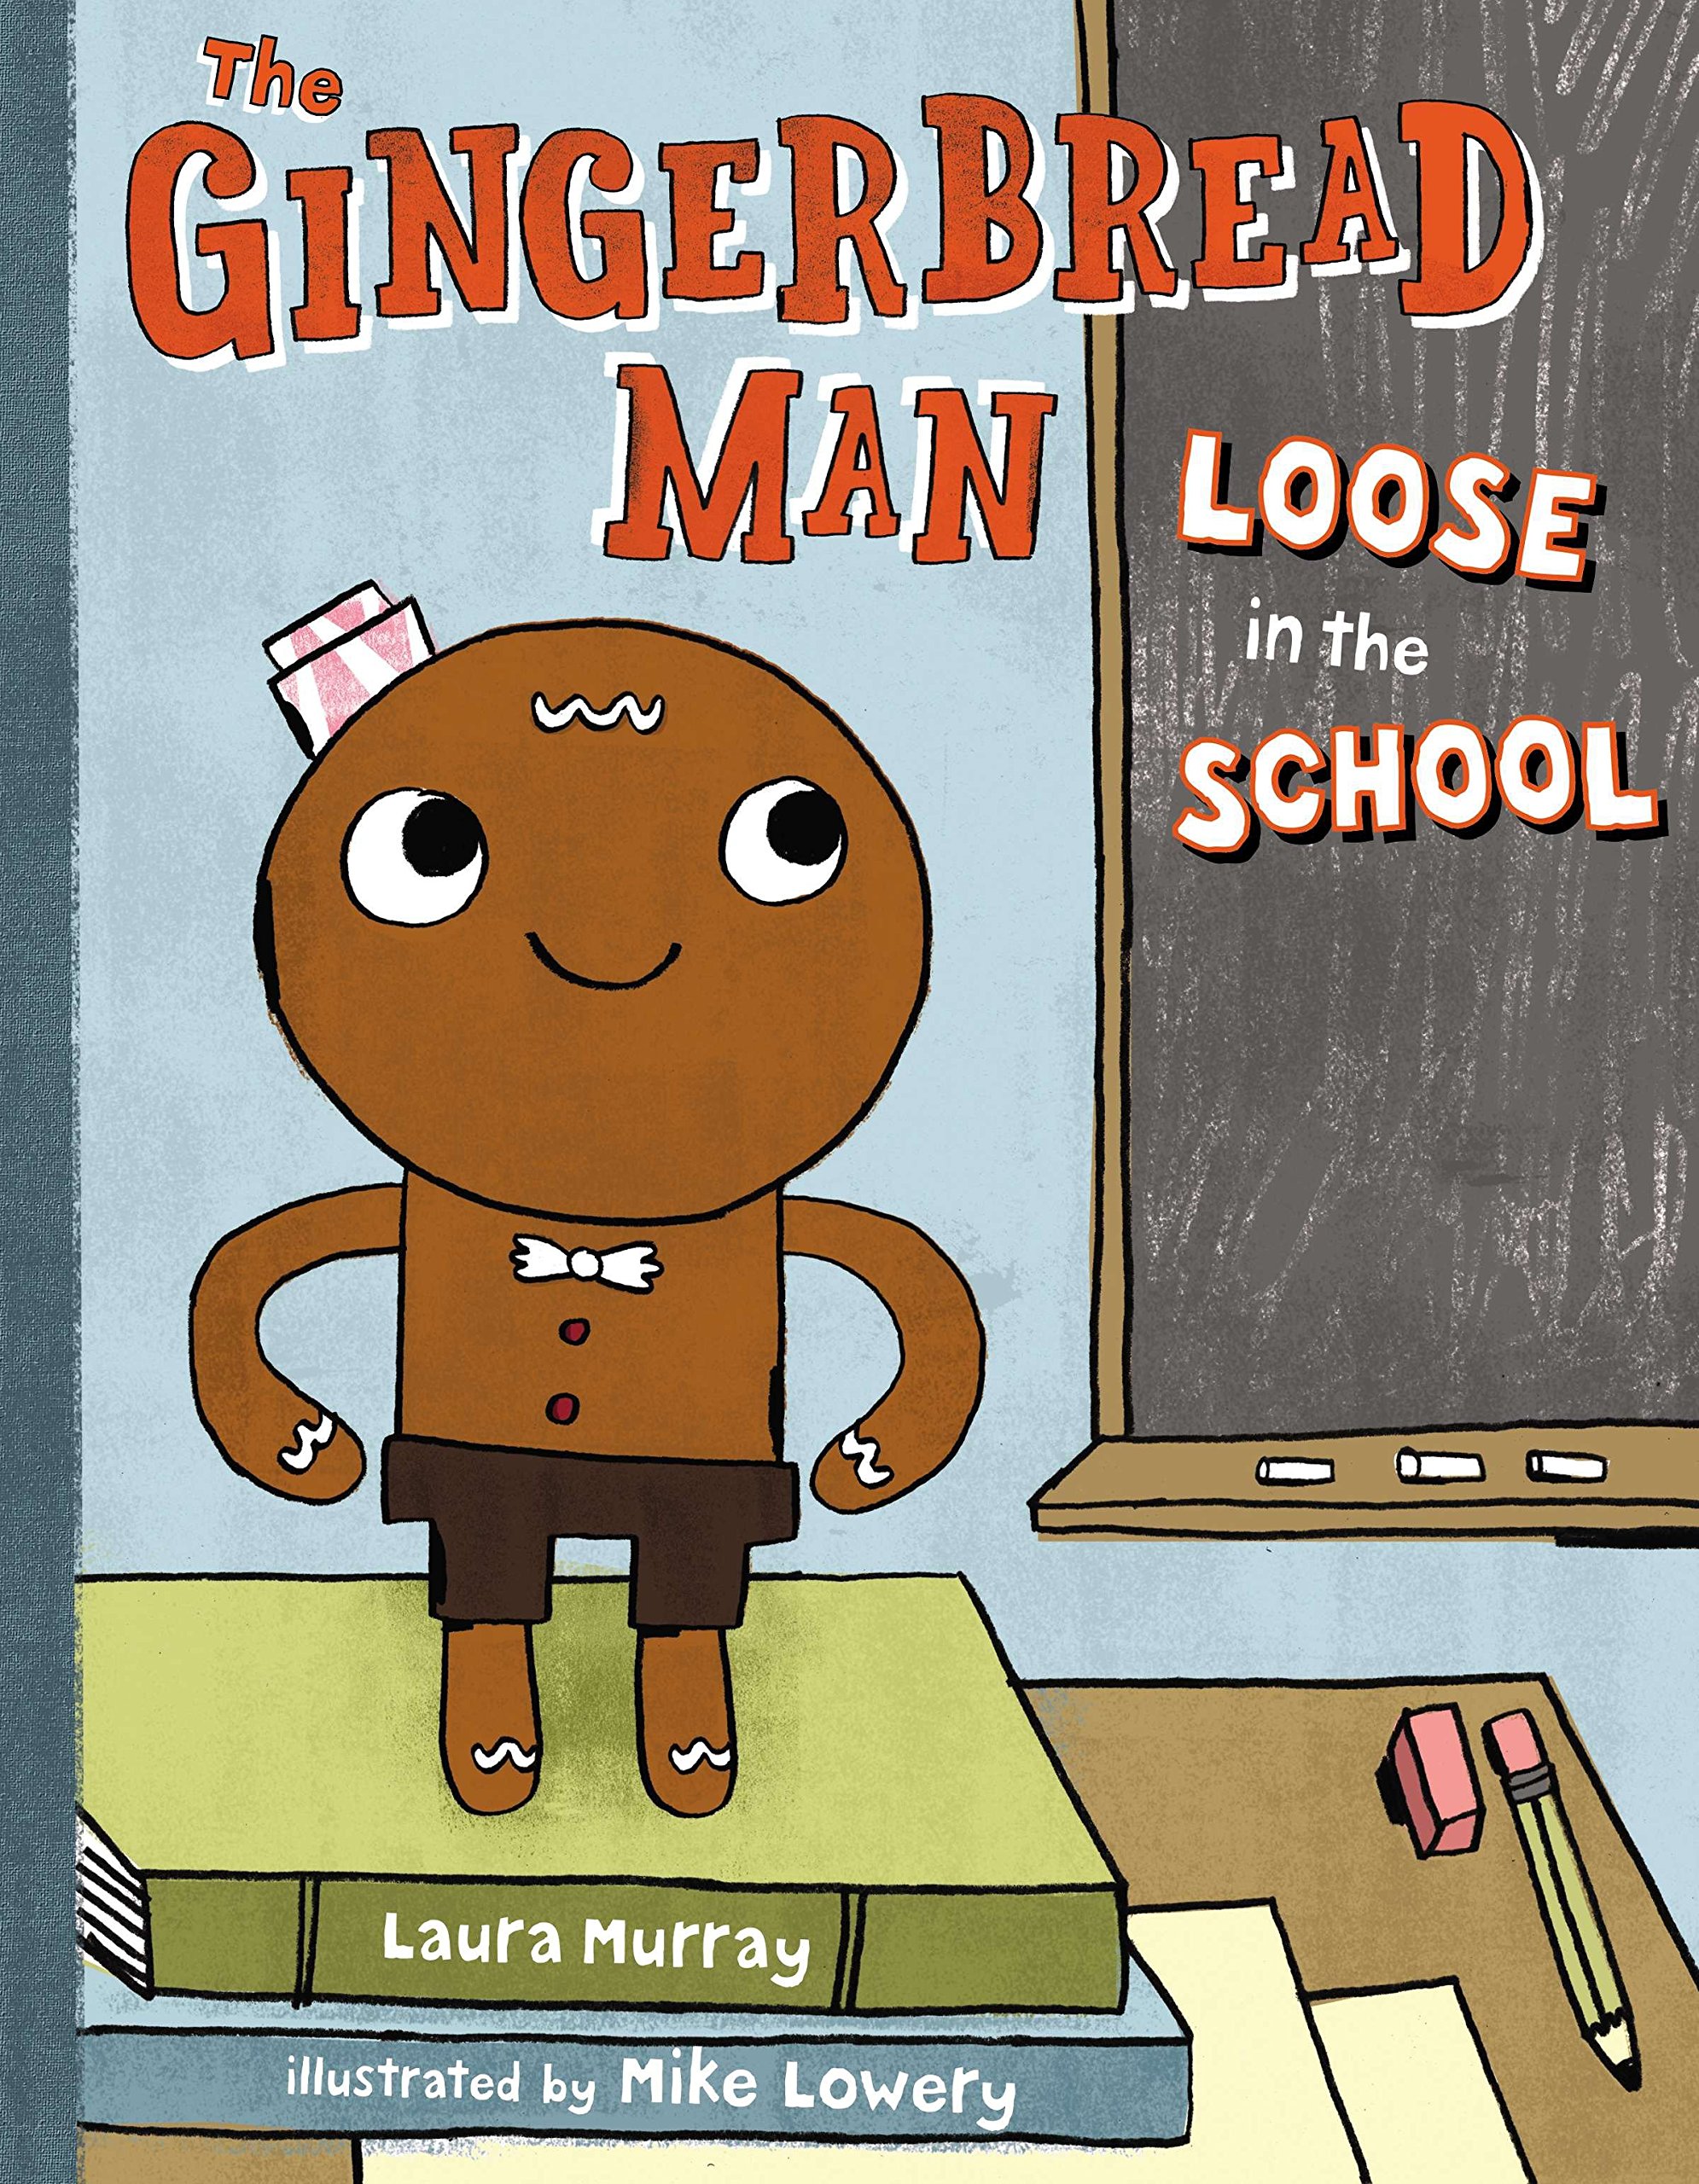 speech and language teaching concepts for The Gingerbread Man Loose In The School in speech therapy